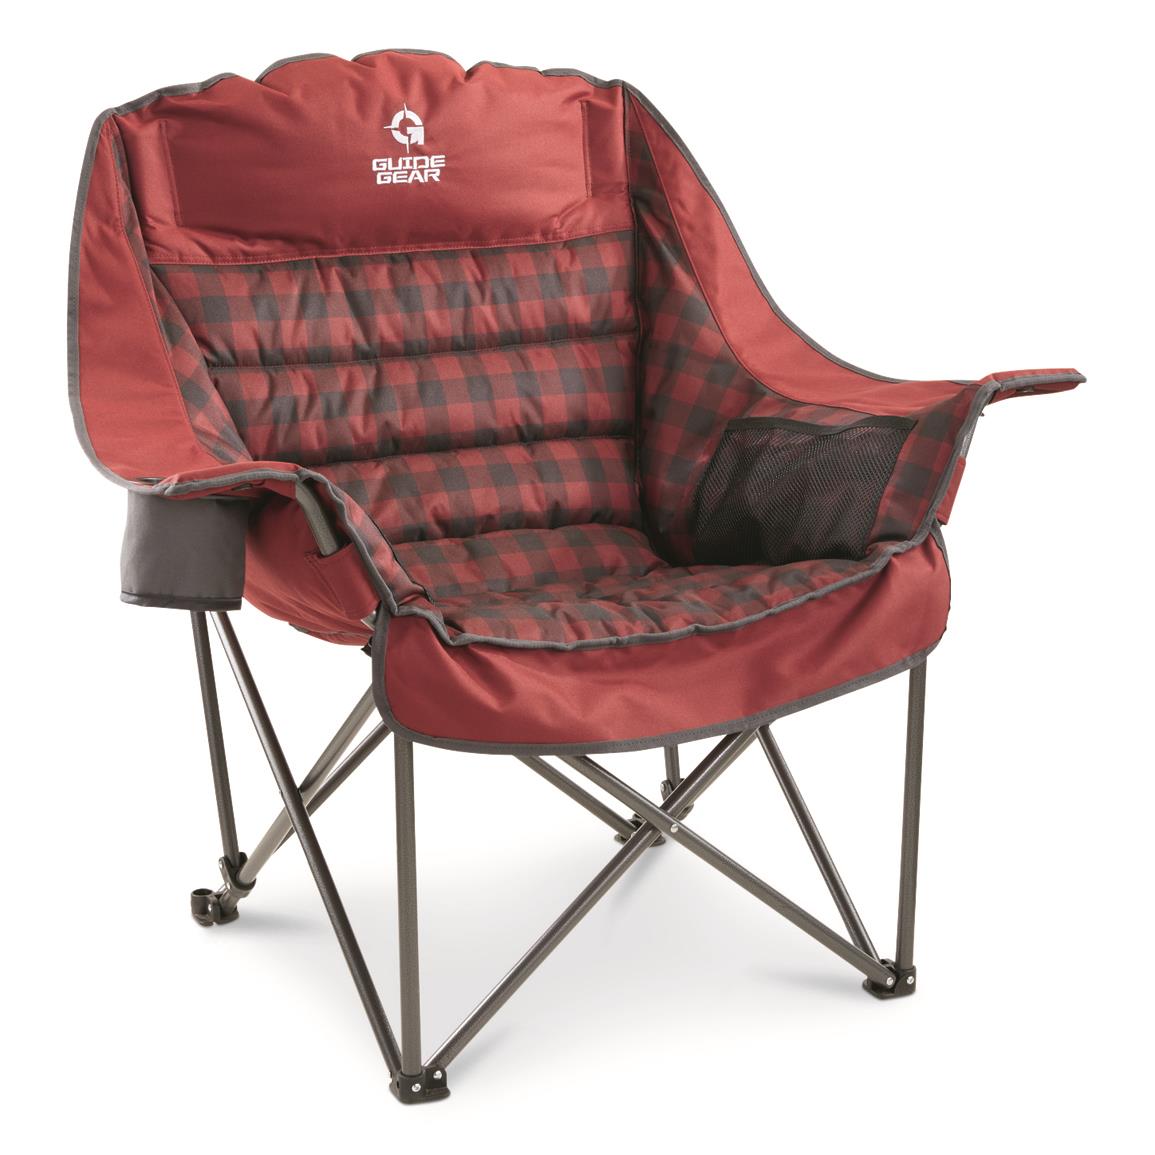 Guide Gear Oversized XL Comfort Padded Camping Chair, 400lb. Capacity